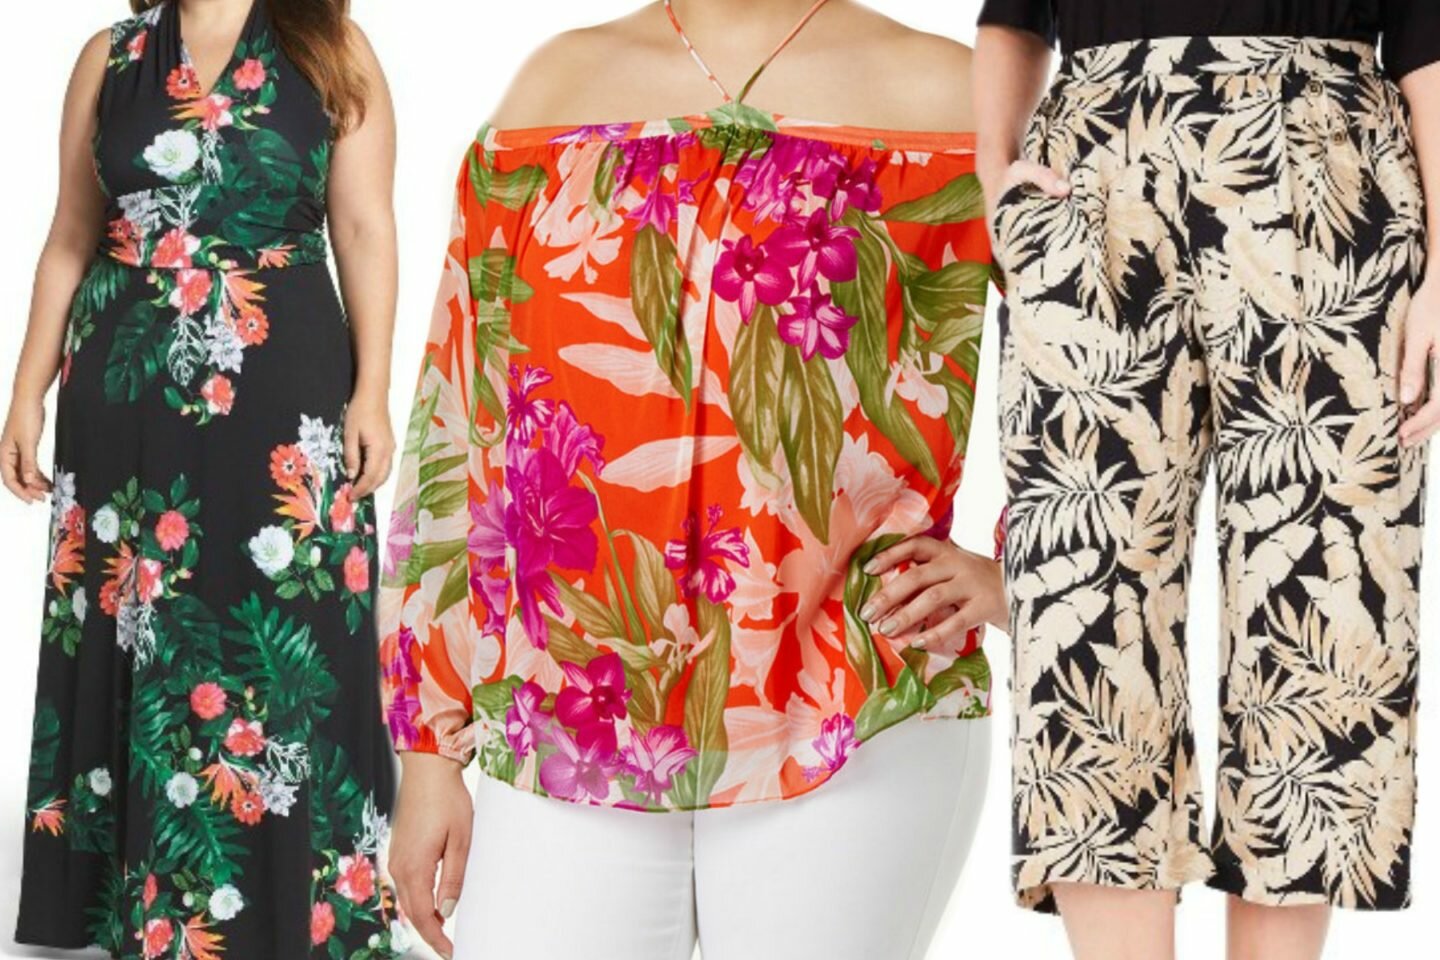 Get the tropical trend this season